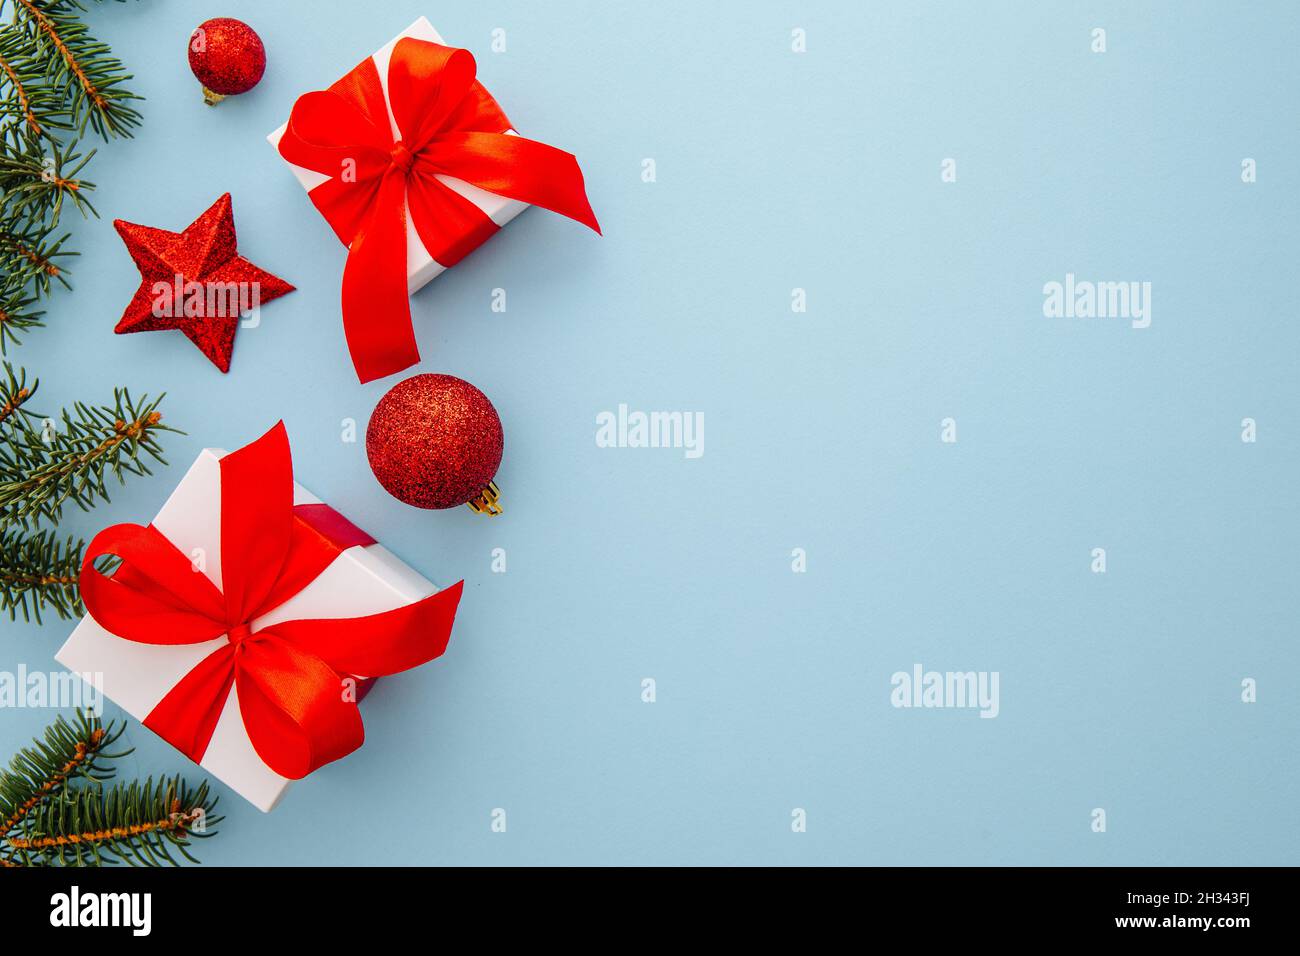 Flat lay with pine tree branches with red christmas balls, stars and gifts on a blue background, christmas, winter, new year concept. Stock Photo